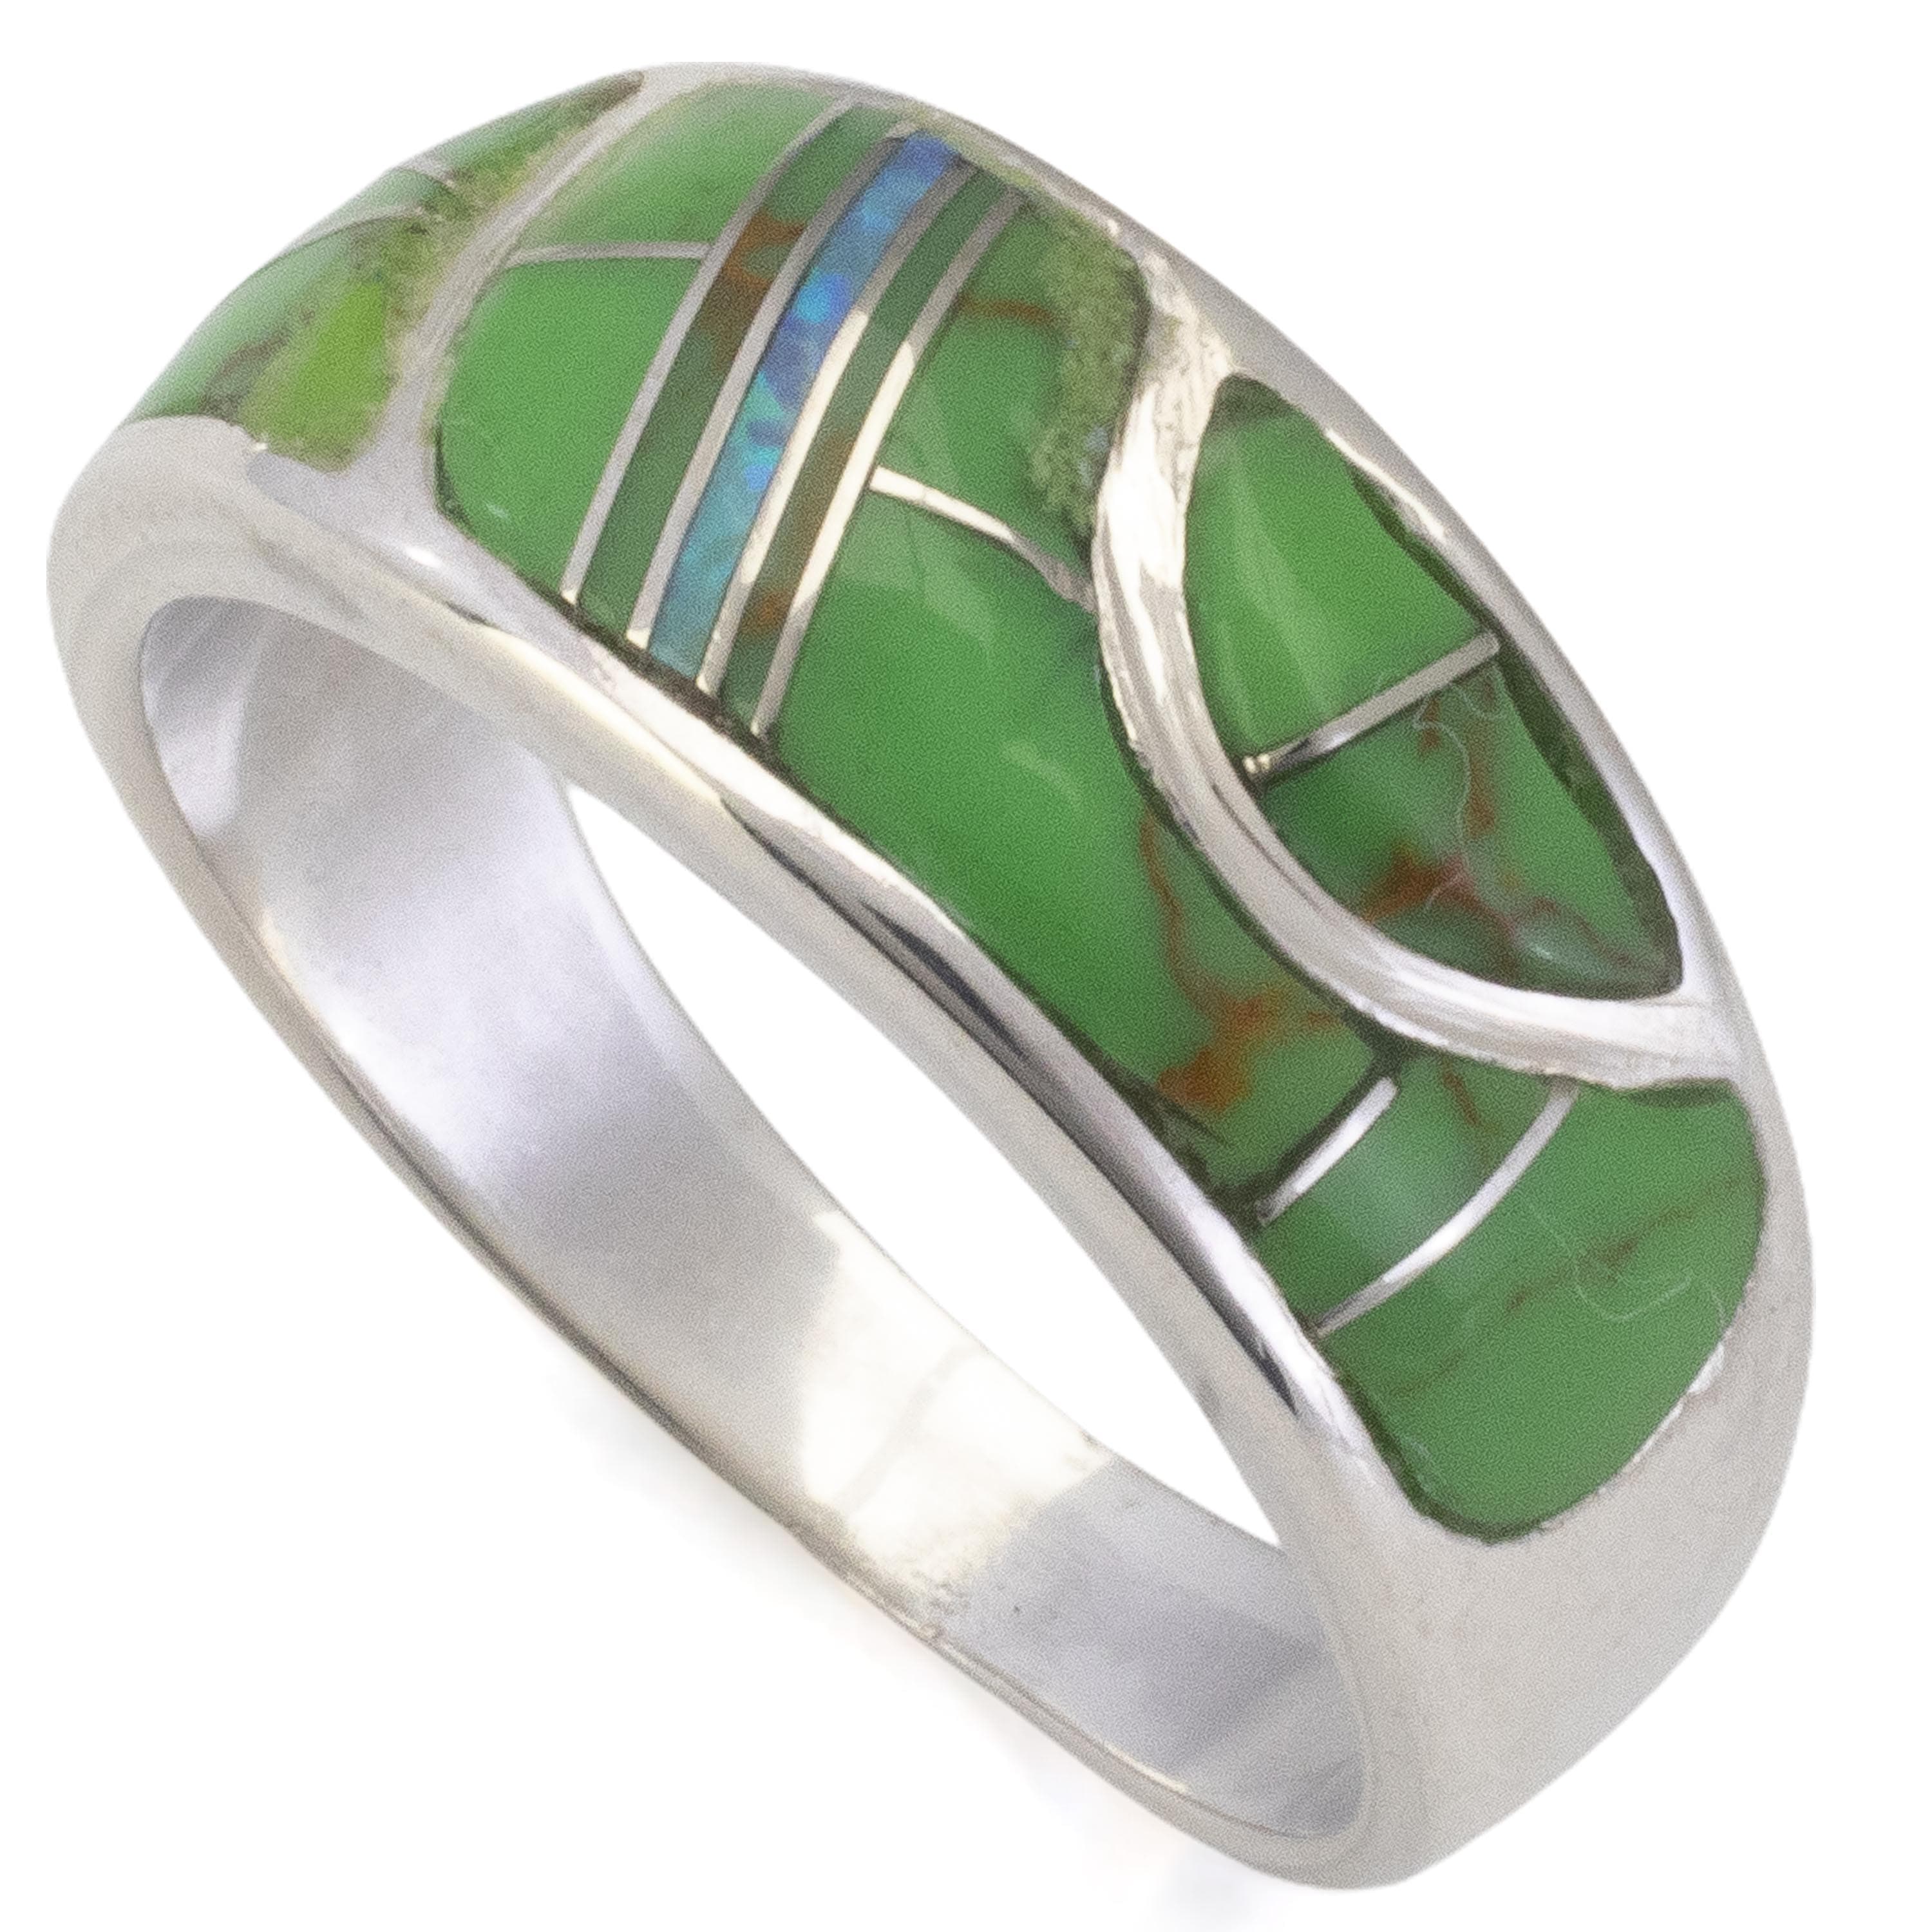 Kalifano Southwest Silver Jewelry Gaspeite 925 Sterling Silver Ring Handmade with Laboratory Opal Accent